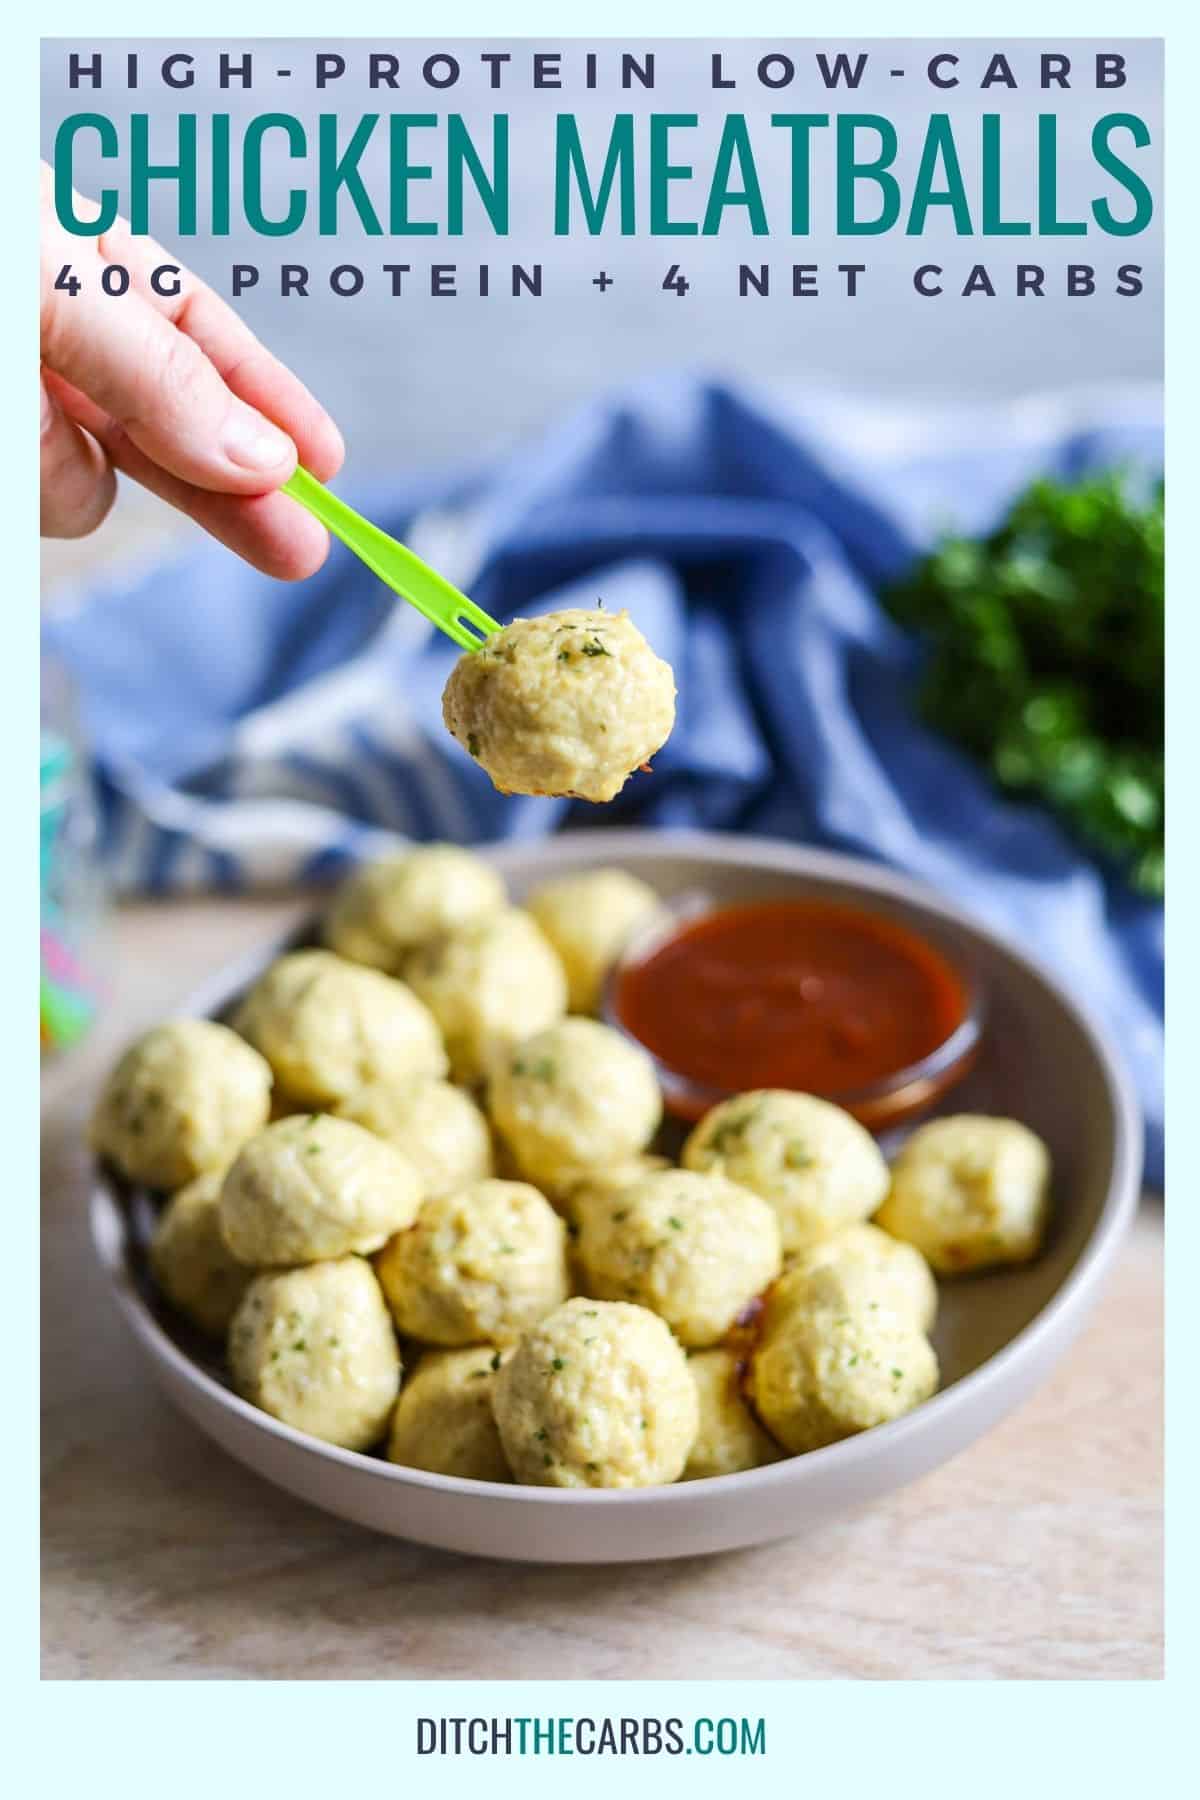 cheesy chicken meatballs high-protein low-carb (HPLC) eaten with a toothpick